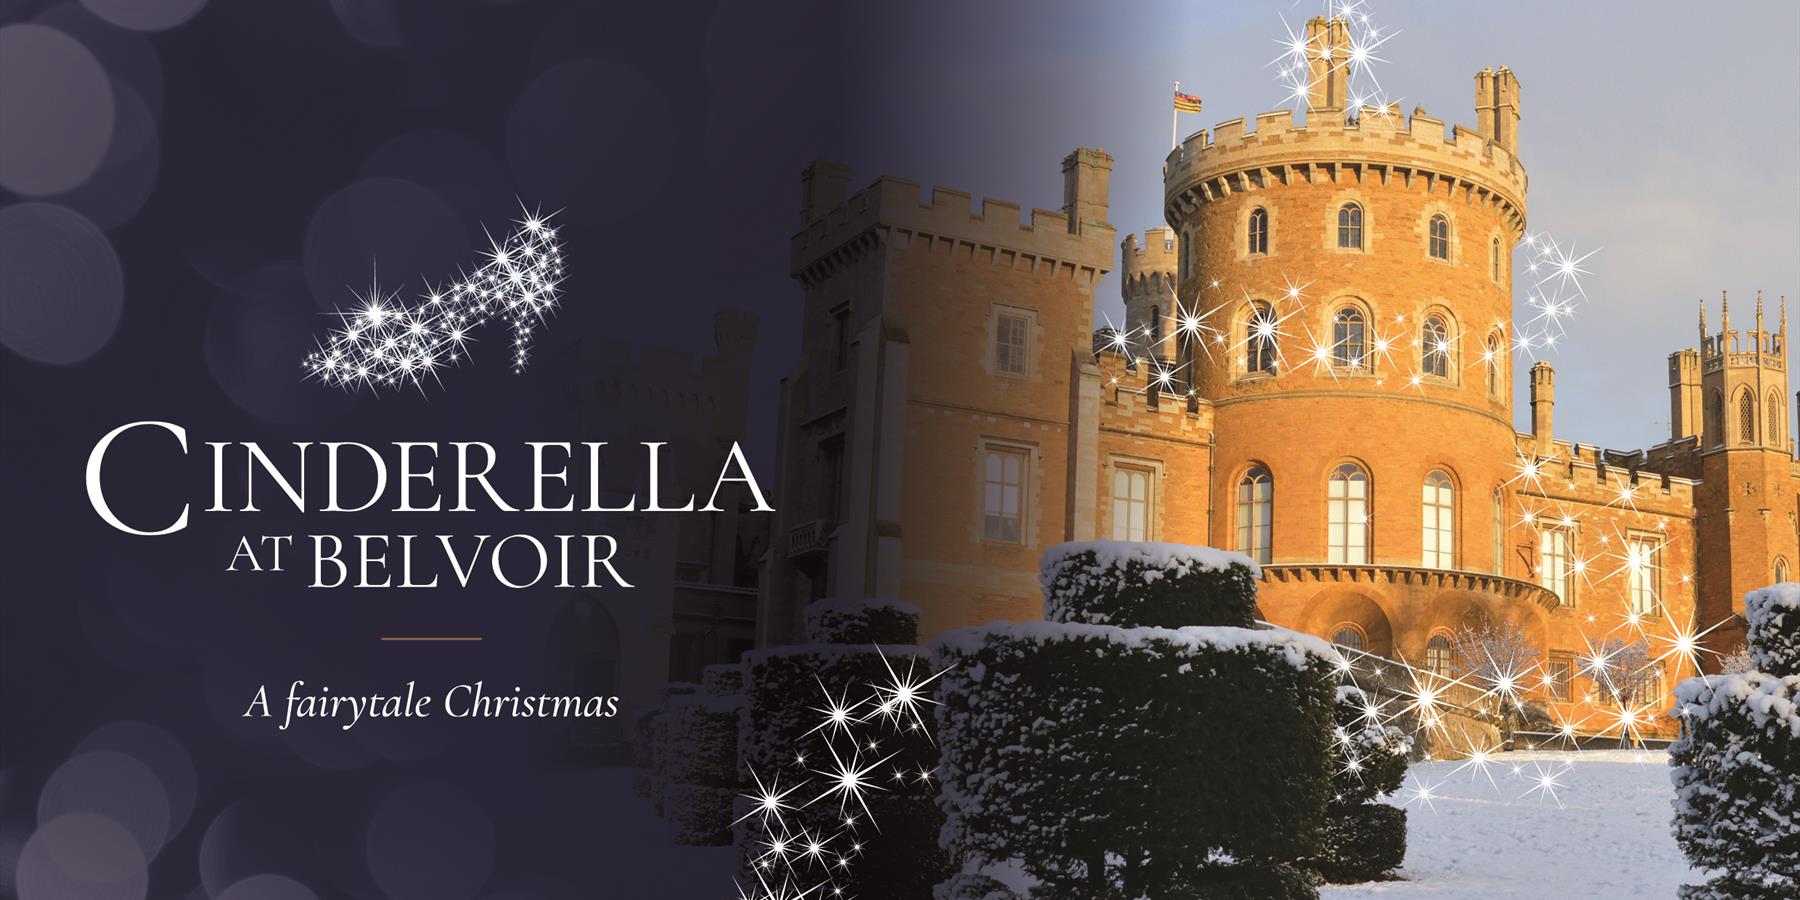 Belvoir Castle dusted in snow with 'Cinderella at Belvoir, a fairytale Christmas' text overlaid